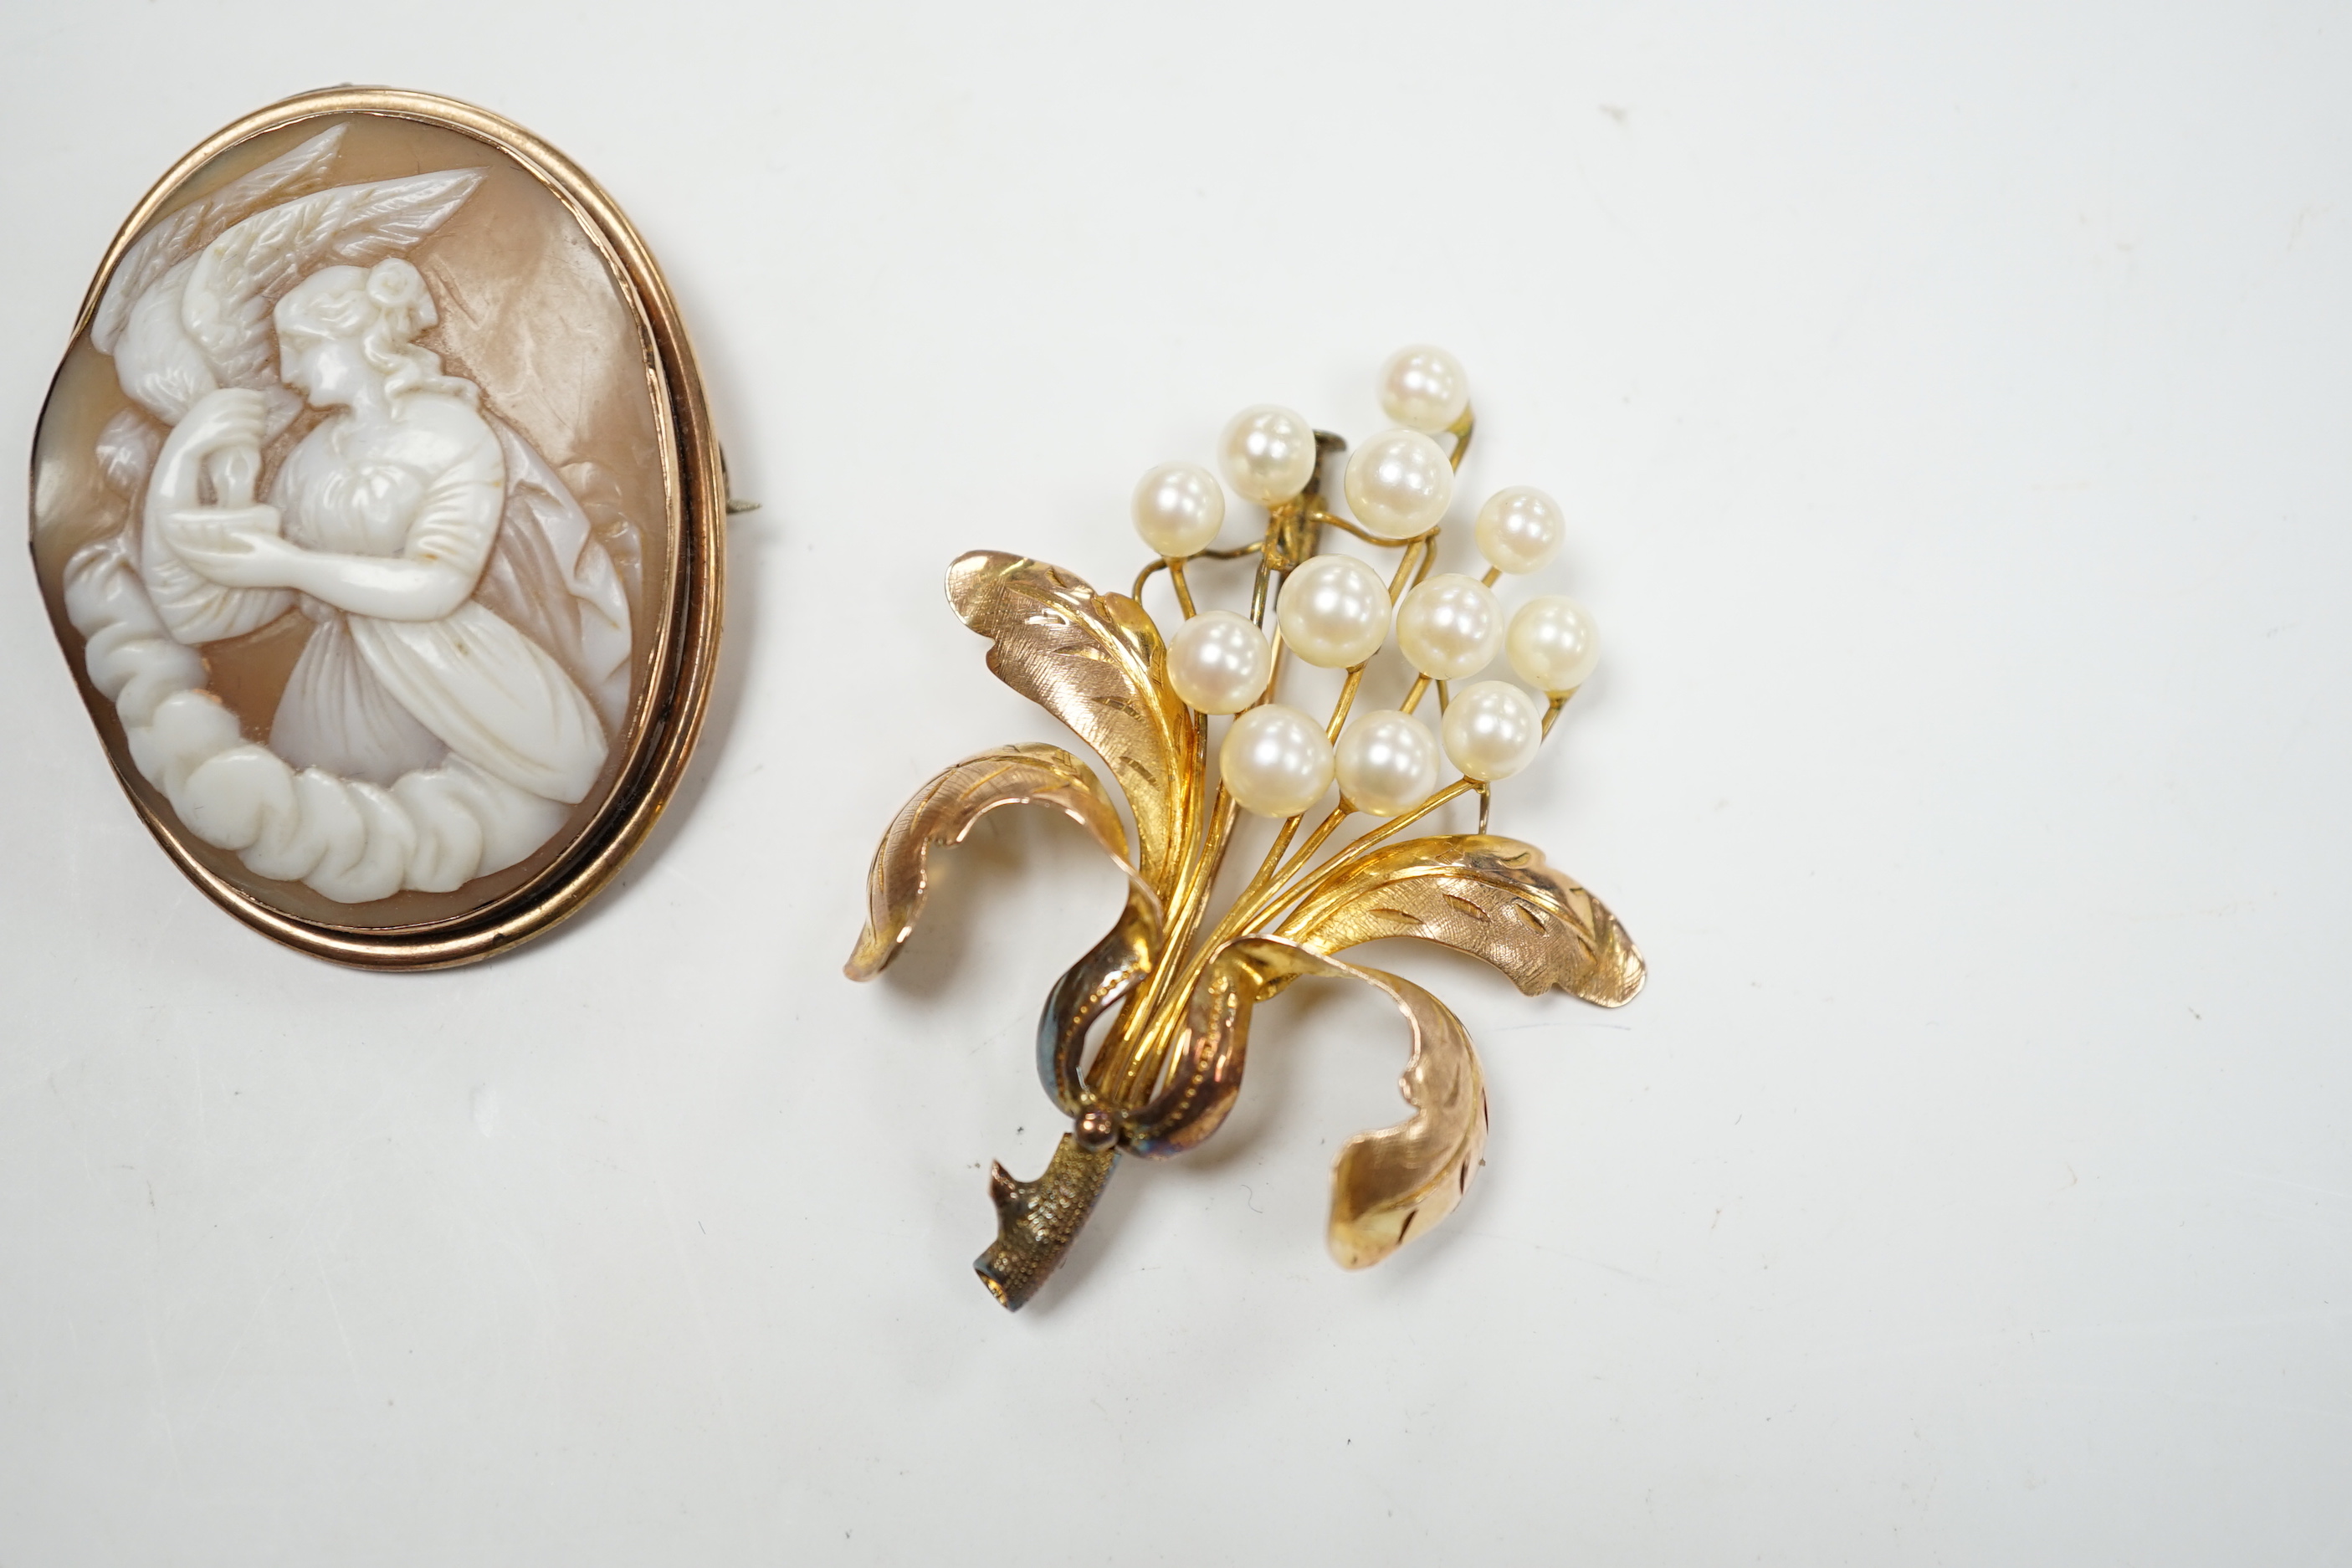 A 14K yellow metal and cultured pearl cluster set floral brooch, 52mm, gross weight 7 grams, together with a yellow metal mounted carved cameo shell brooch.